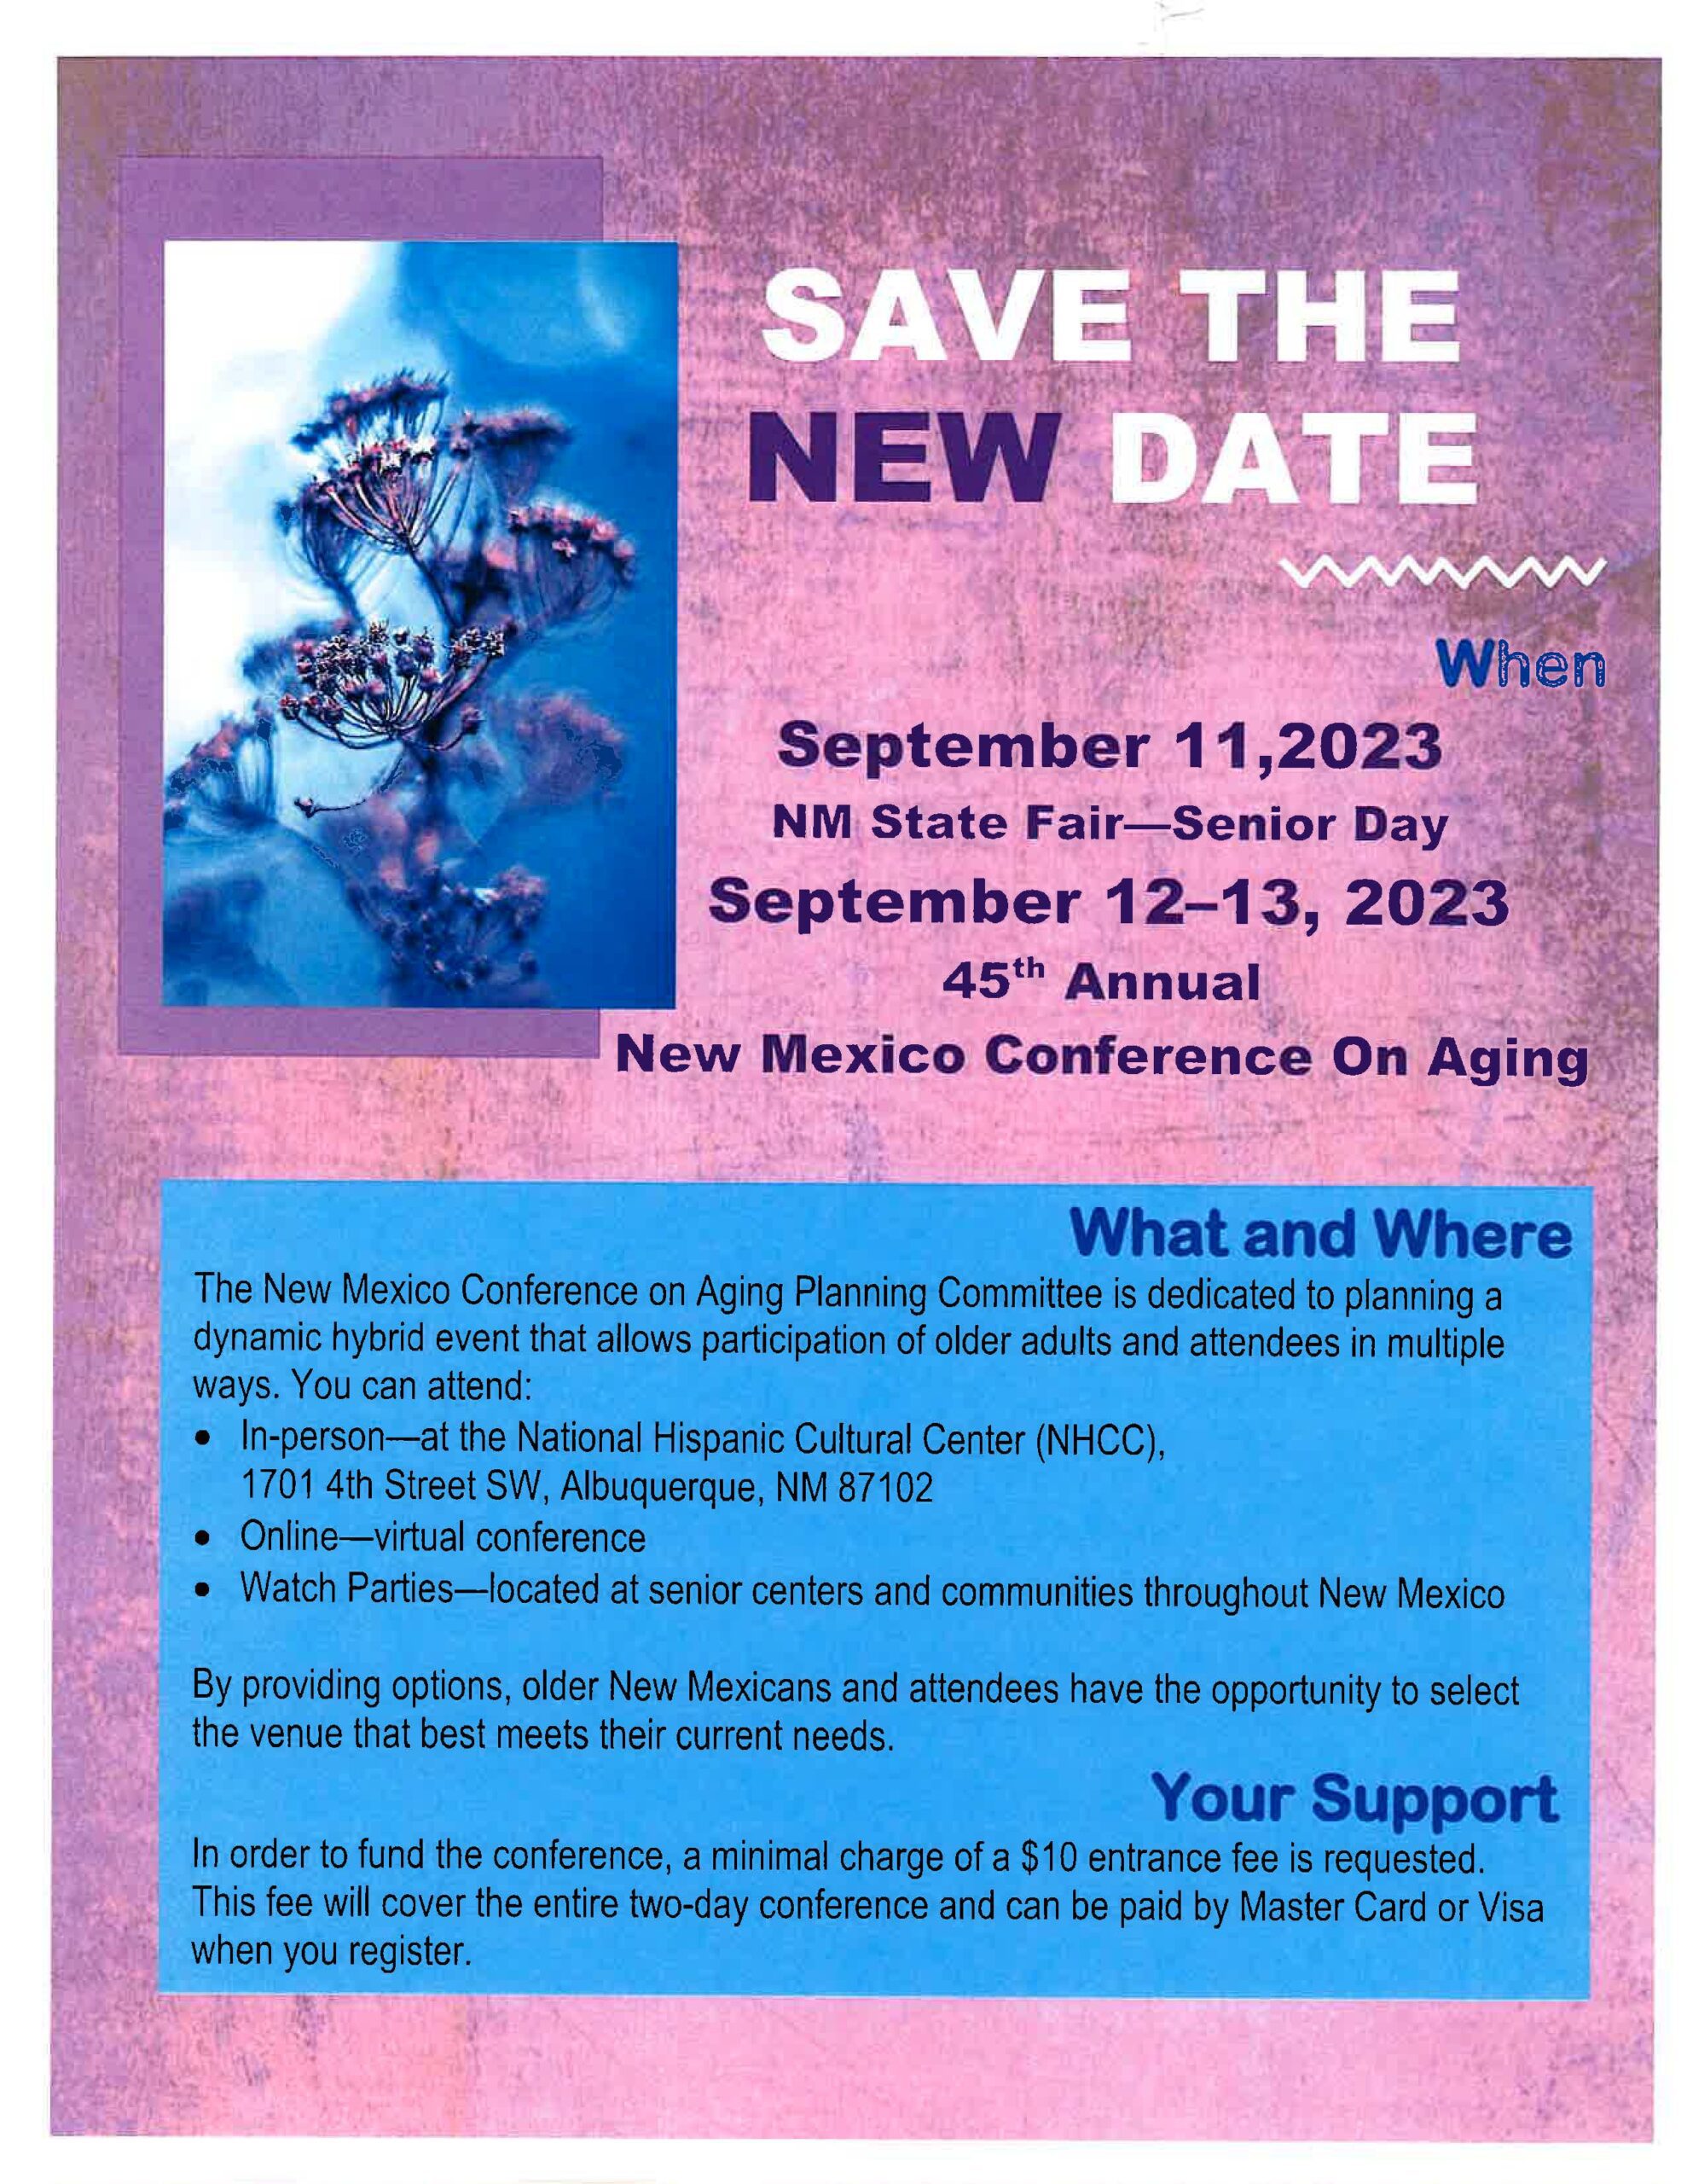 There are some great events on the horizon for New Mexico seniors! On September 11th the New Mexico State Fair will hold it’s annual Senior Day. Then on September 12th and 13th the 45th Annual New Mexico Conference on Aging will be held!  The New Mexico Conference on Aging Planning Committee is dedicated to planning a dynamic hybrid event that allows participation of older adults and attendees in multiple ways. You can attend:  • In-person-at the National Hispanic Cultural Center (NHCC), 1701 4th Street SW, Albuquerque, NM 87102 • Online-virtual conference • Watch Parties-located at senior centers and communities throughout New Mexico  By providing options, older New Mexicans and attendees have the opportunity to select the venue that best meets their current needs.  In order to fund the conference, a minimal charge of a $10 entrance fee is requested. This fee will cover the entire two-day conference and can be paid by Master Card or Visa when you register.